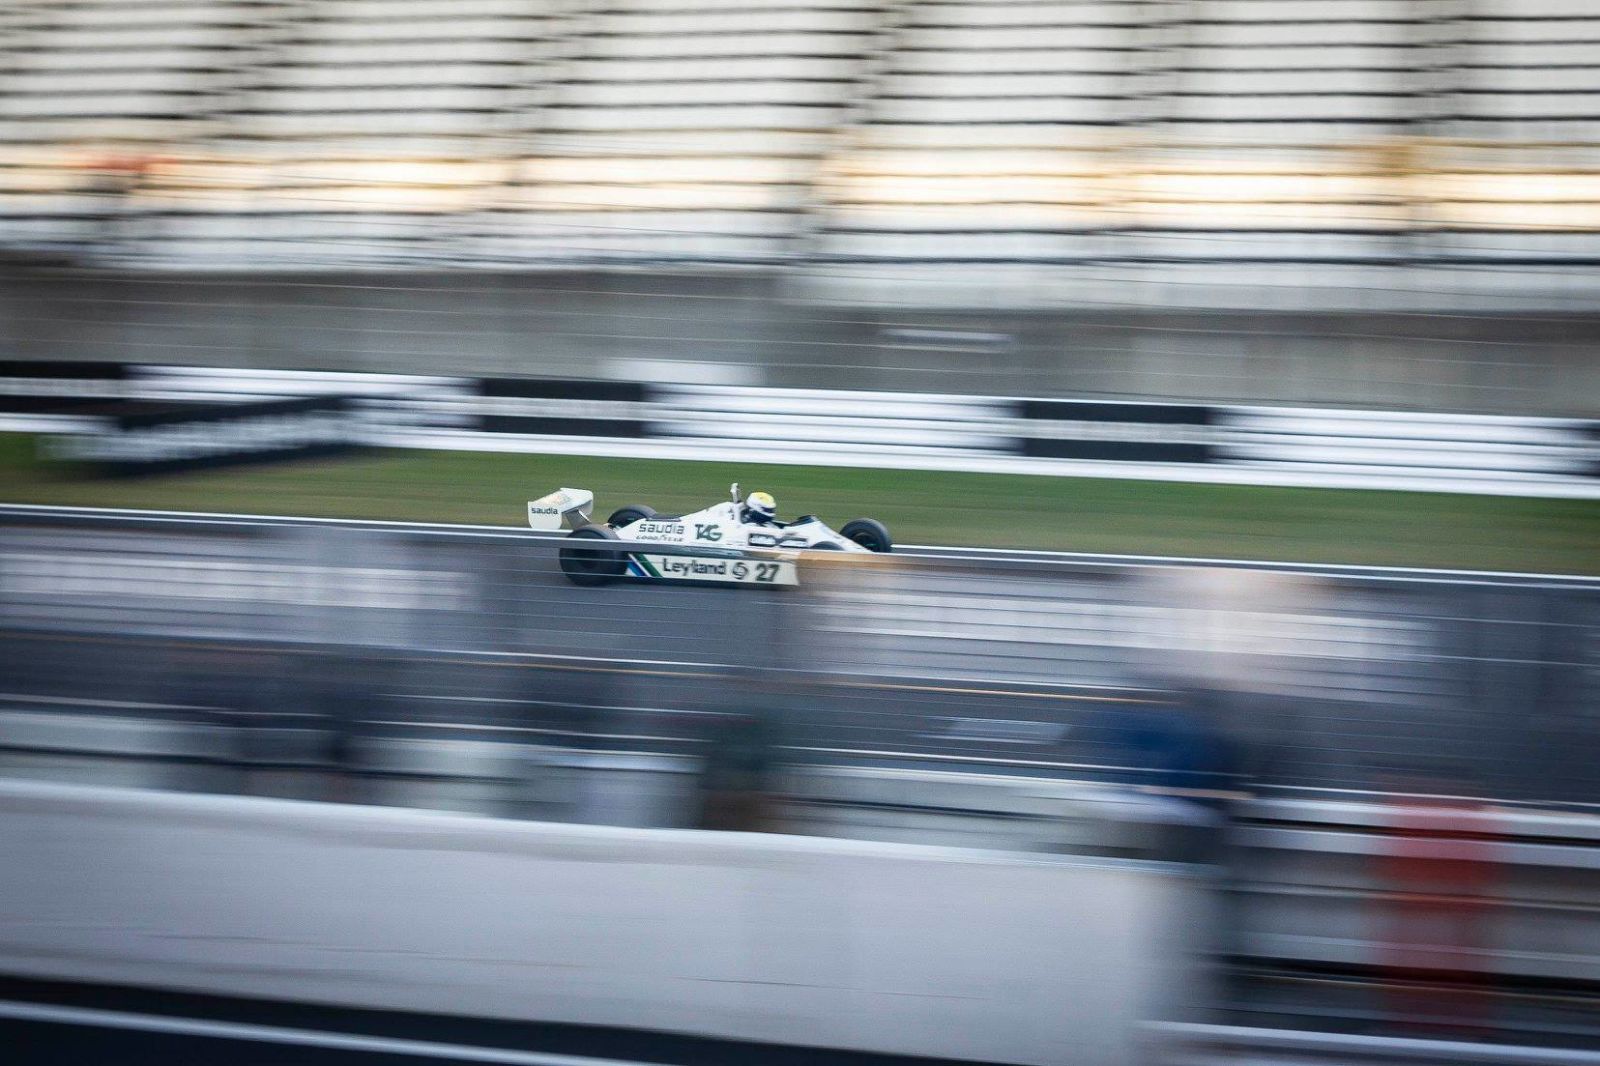 Illustration for article titled Last part of the photodump from Sound of Engine @ Suzuka circuit